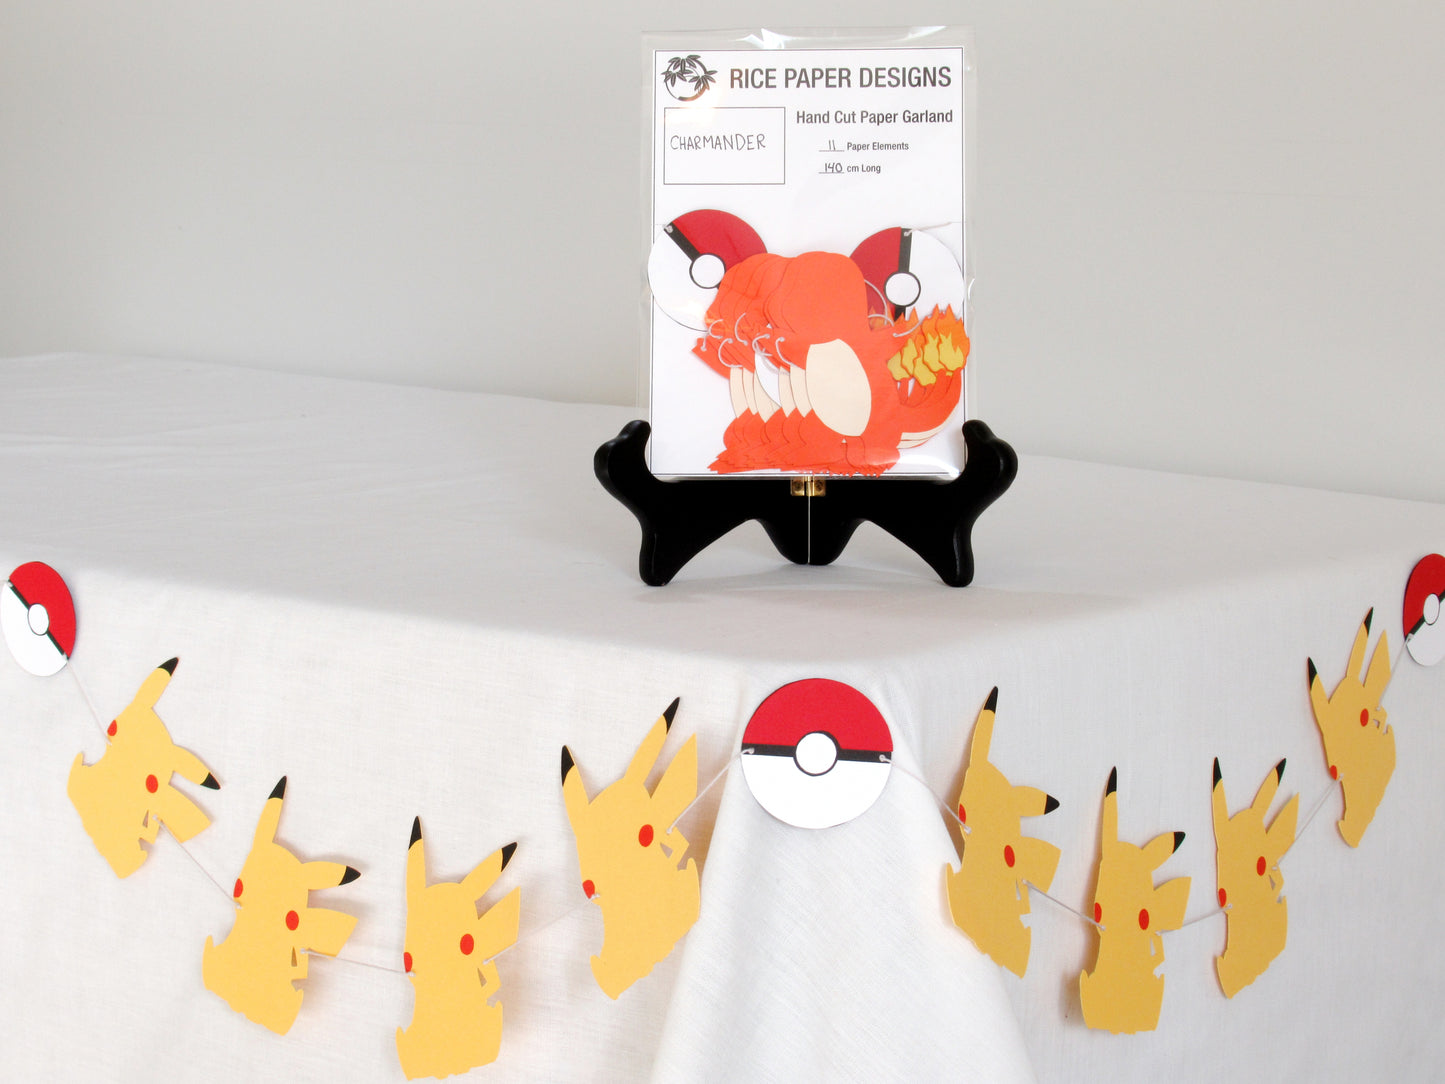 A garland with a series of paper charmanders and pokeballs arranged in neat bundle inside a clear bag. There is a paper behind them showing the Rice Paper Designs logo, and information about the garland. The bag is on a table, and below it is a sample garland with pikachu hung up.